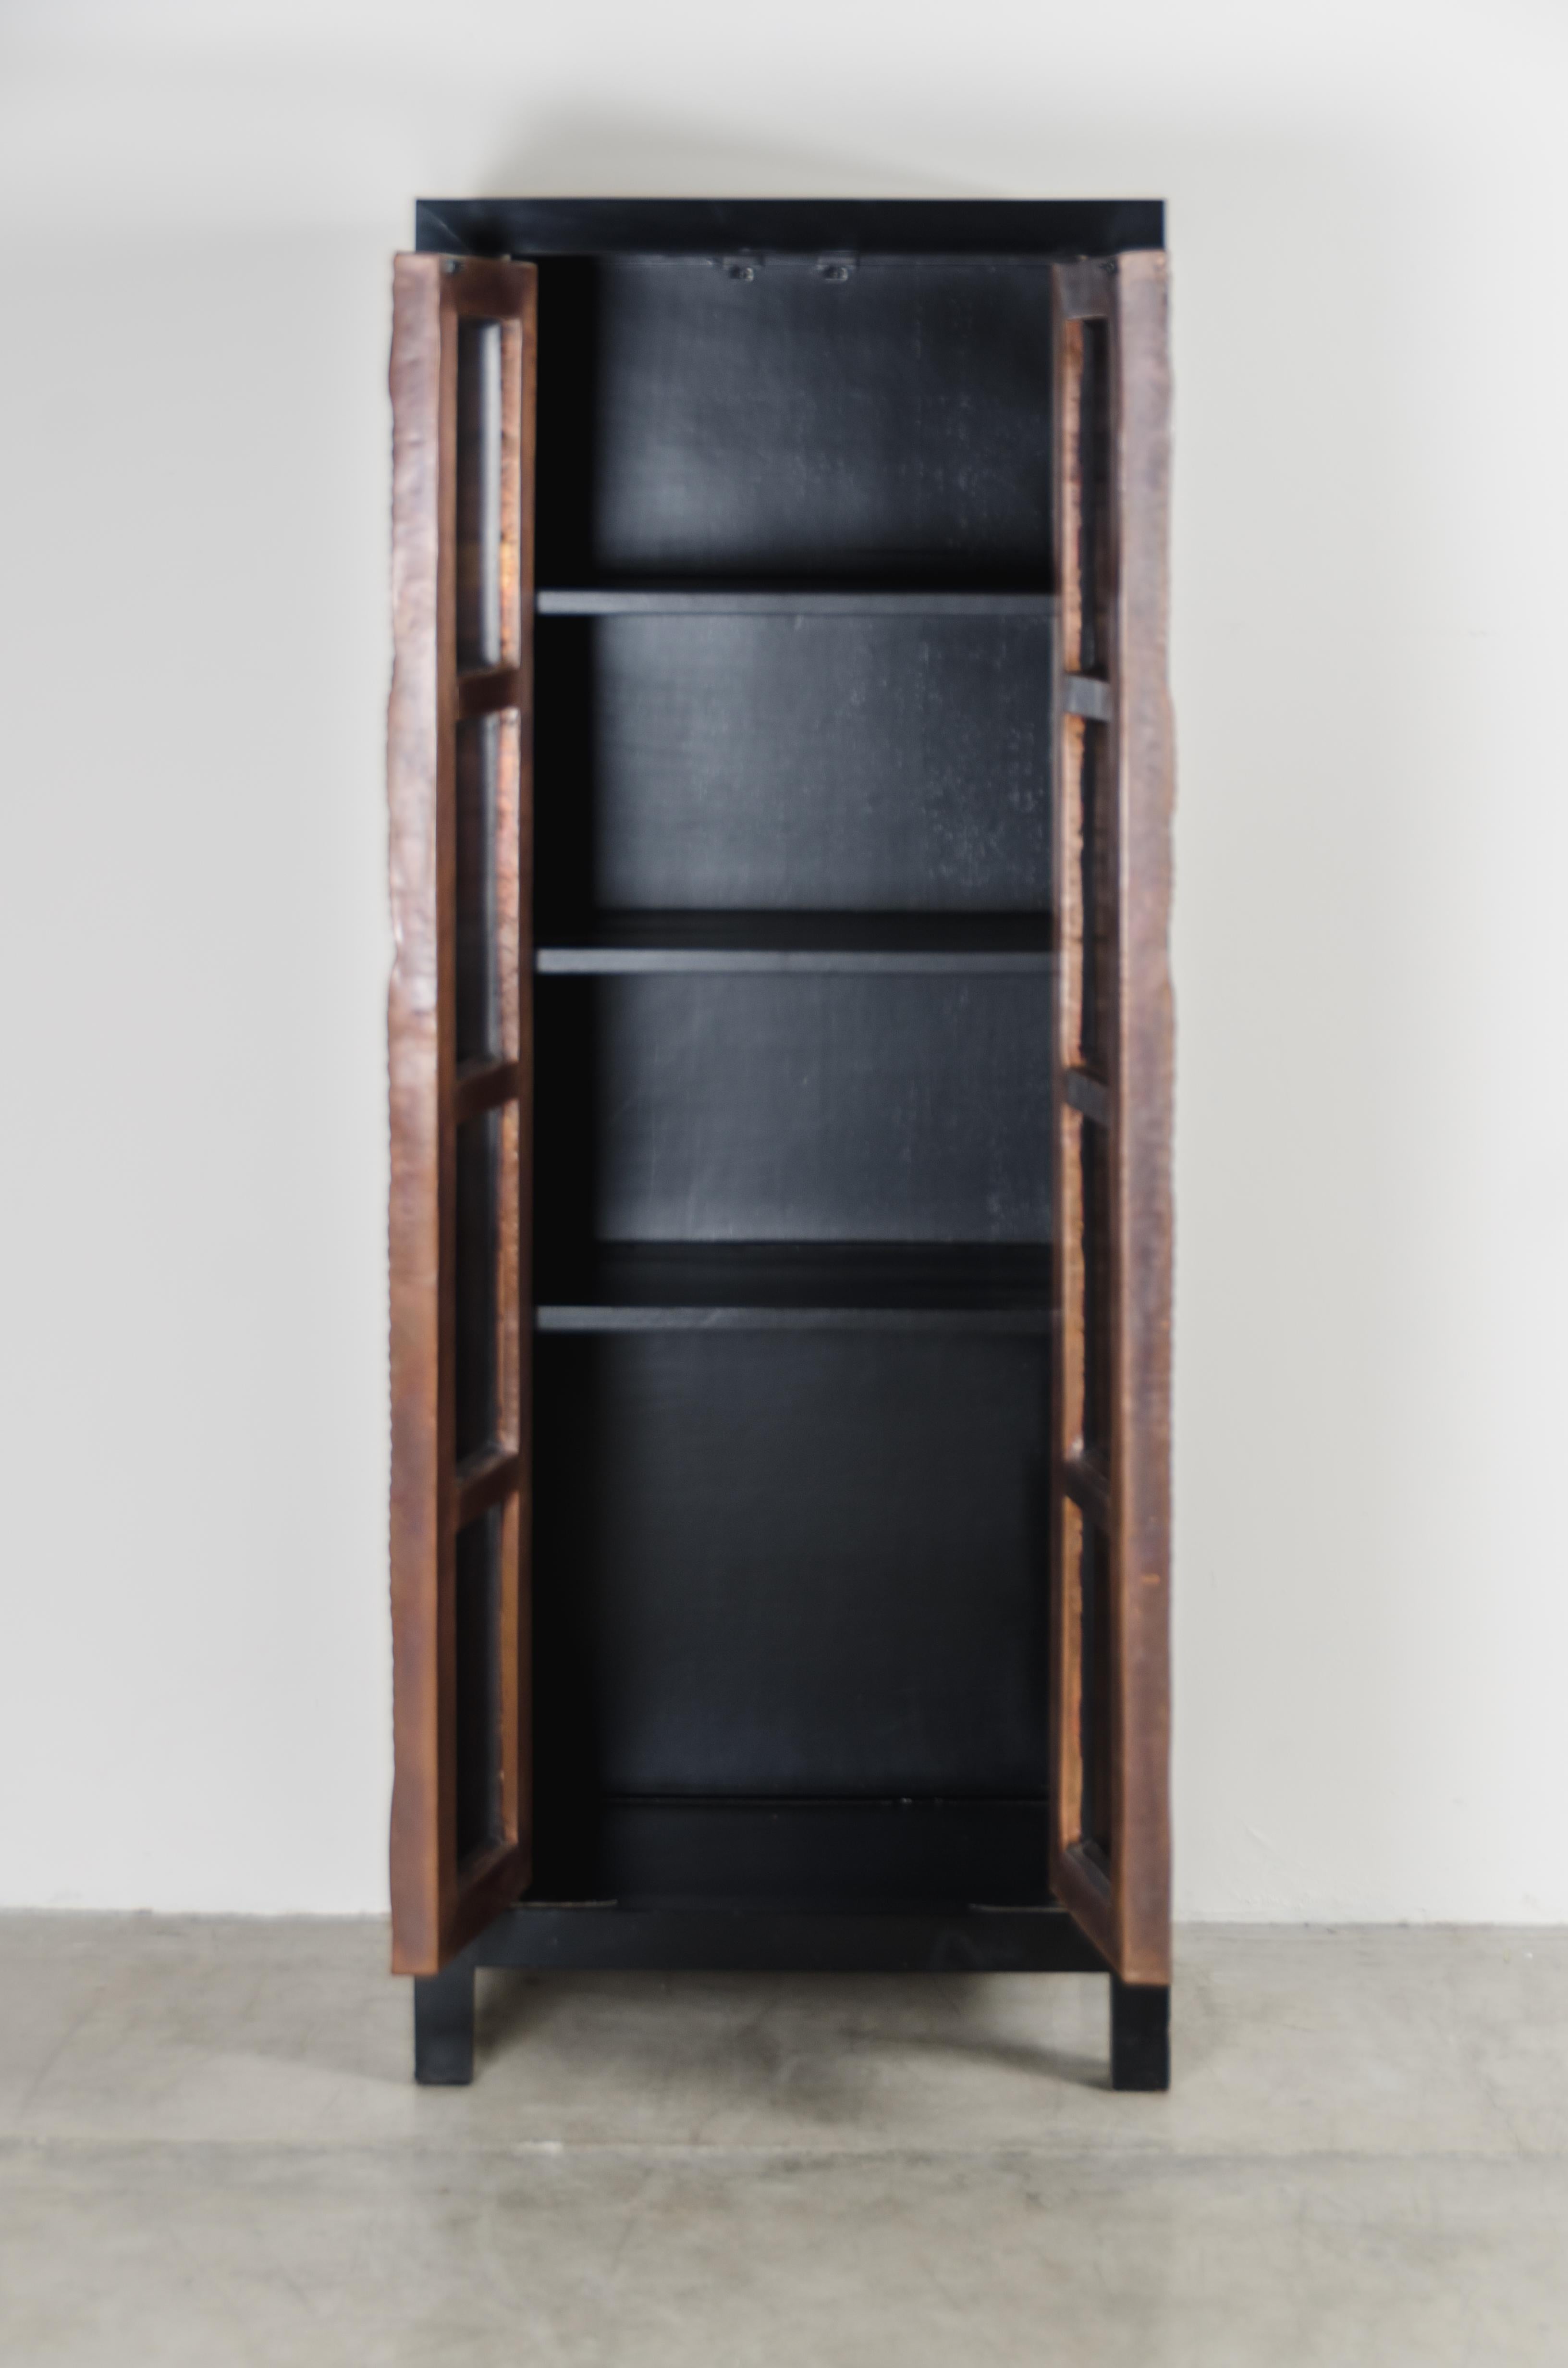 Repoussé Banana Leaf Design Narrow Cabinet by Robert Kuo, Hand Repousse, Limited Edition For Sale